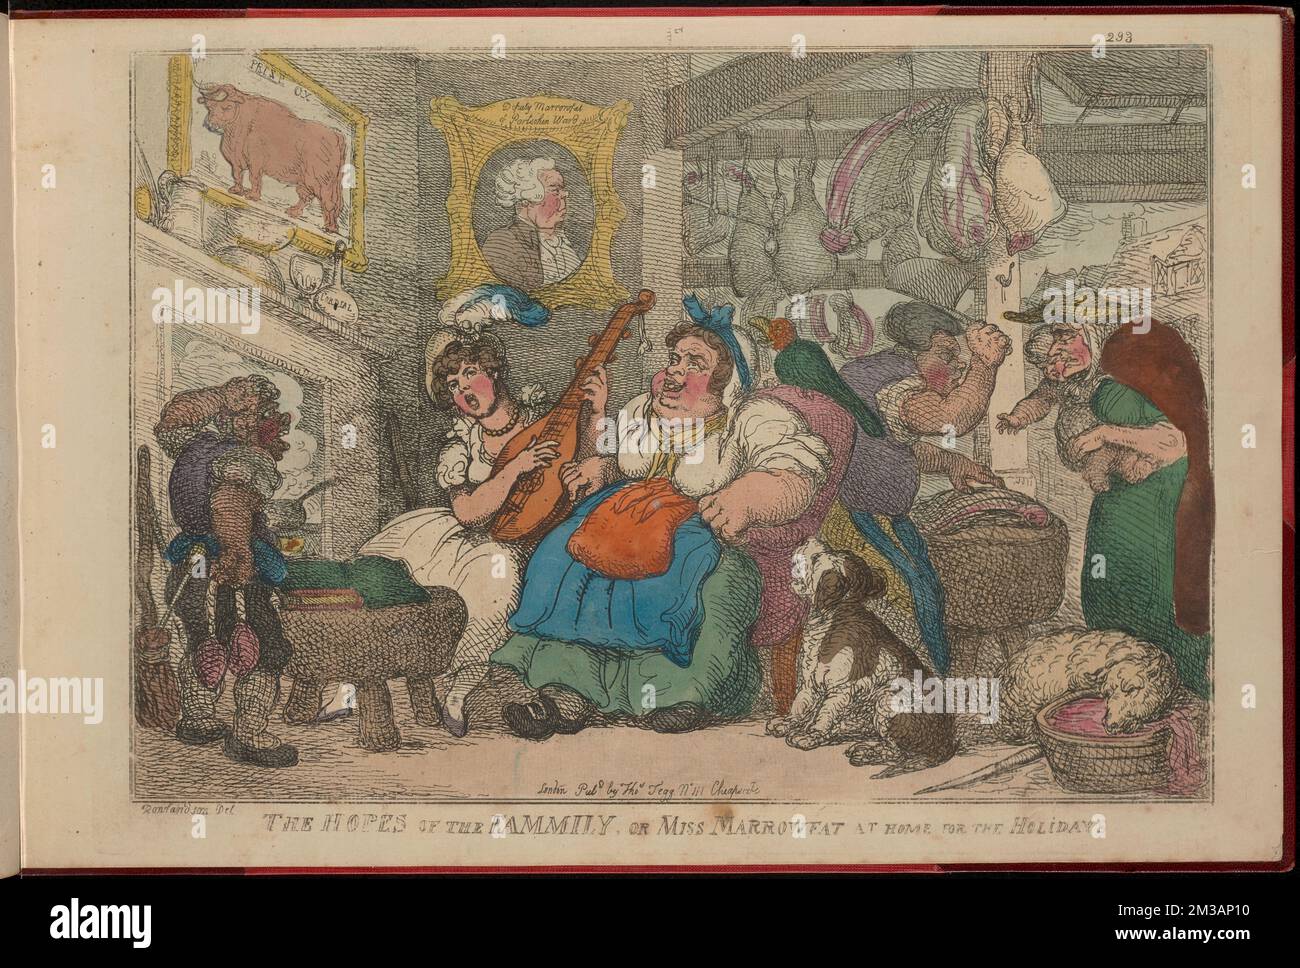 The hopes of the fammily : Or Miss Marrowfat at home for the holidays , Musicians, Butchers, Dogs, Meat. Thomas Rowlandson (1756-1827). Prints and Drawings Stock Photo